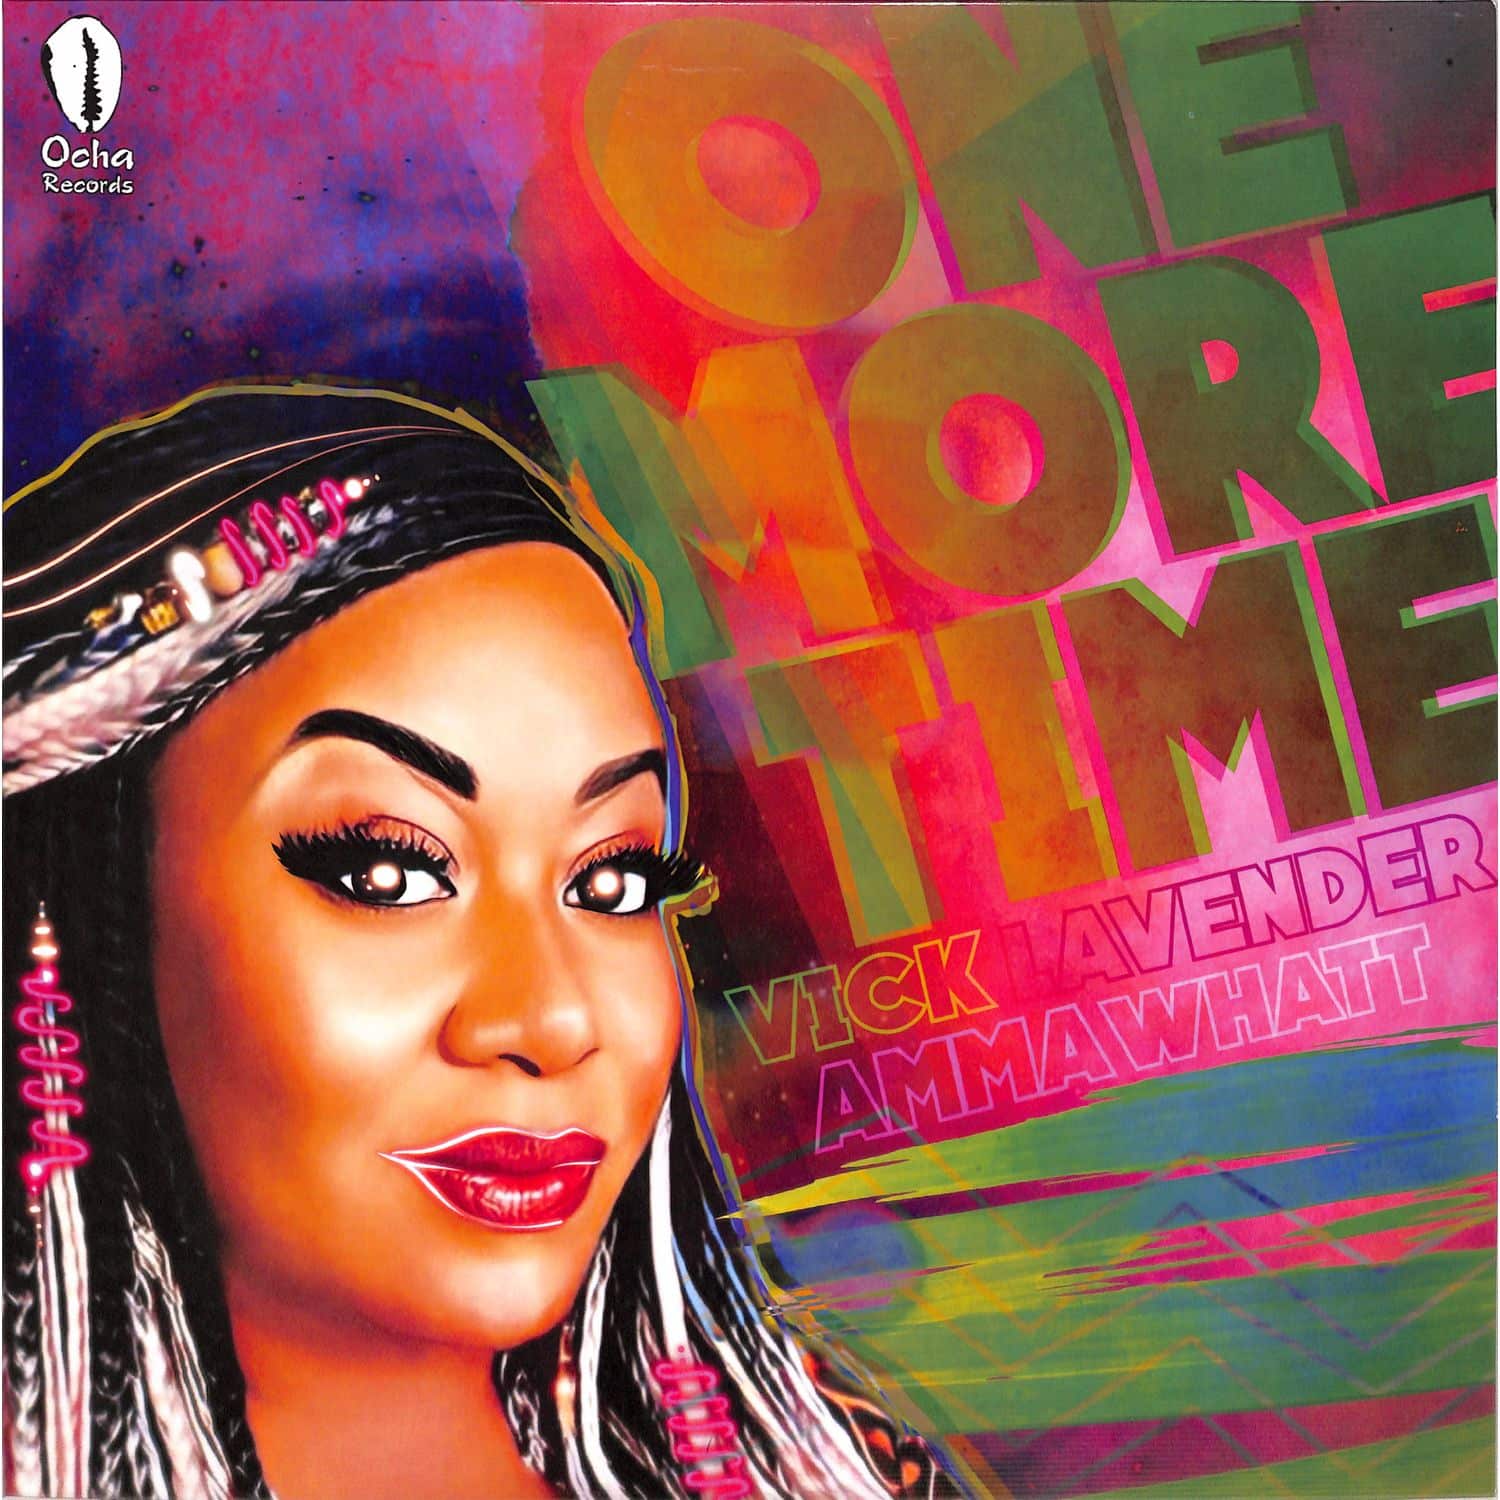 Vick Lavender - ONE MORE TIME